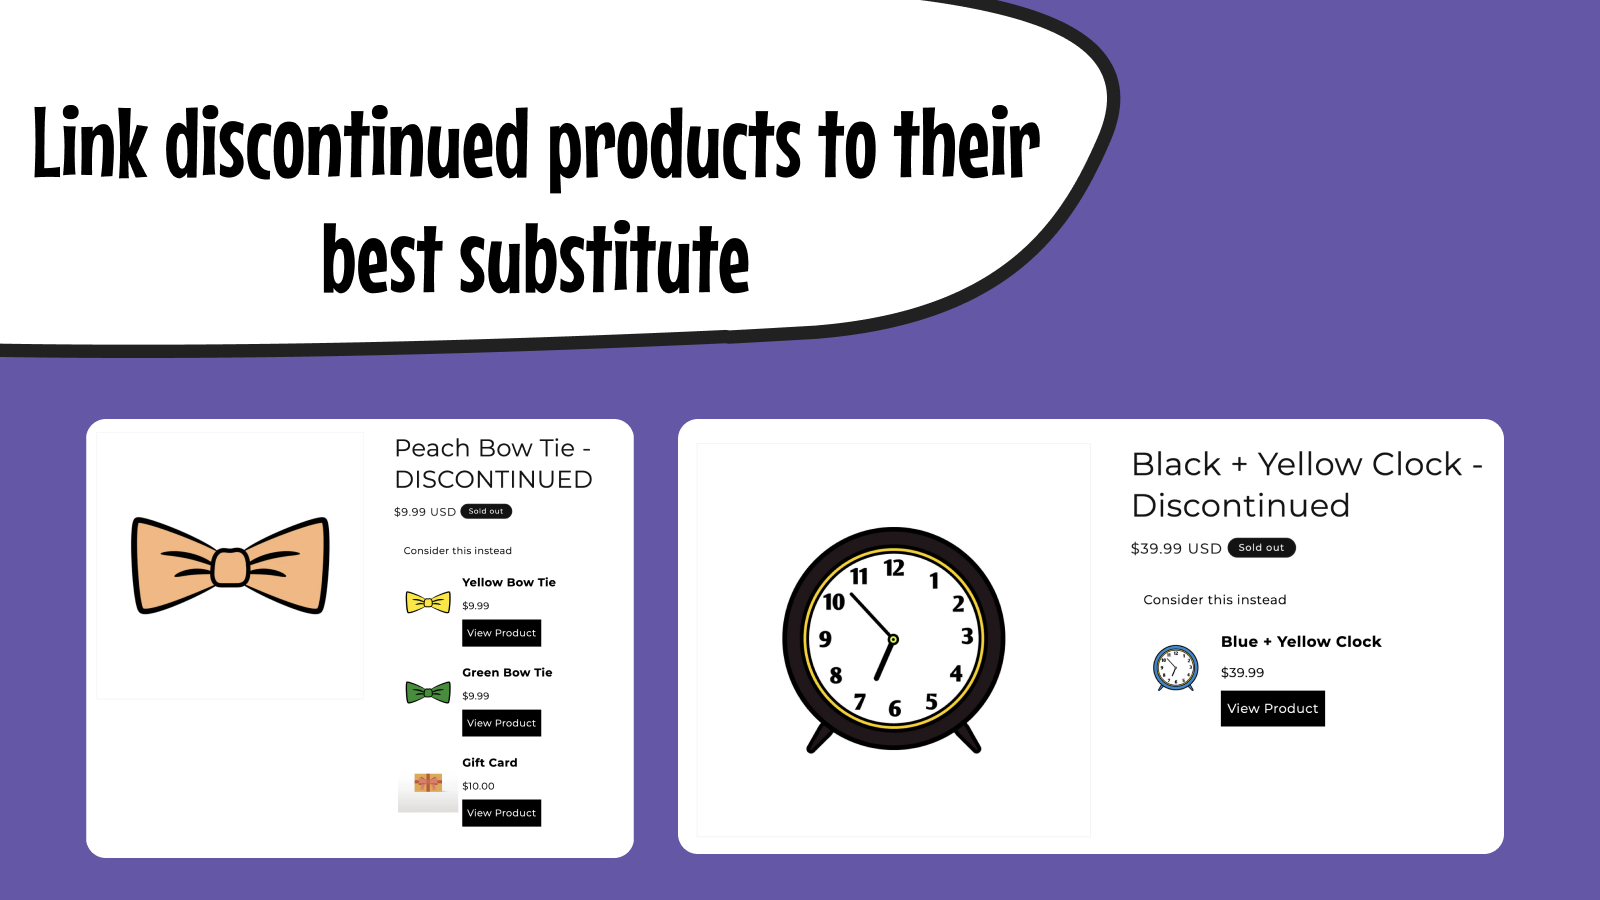 Link discontinued products to their best substitute